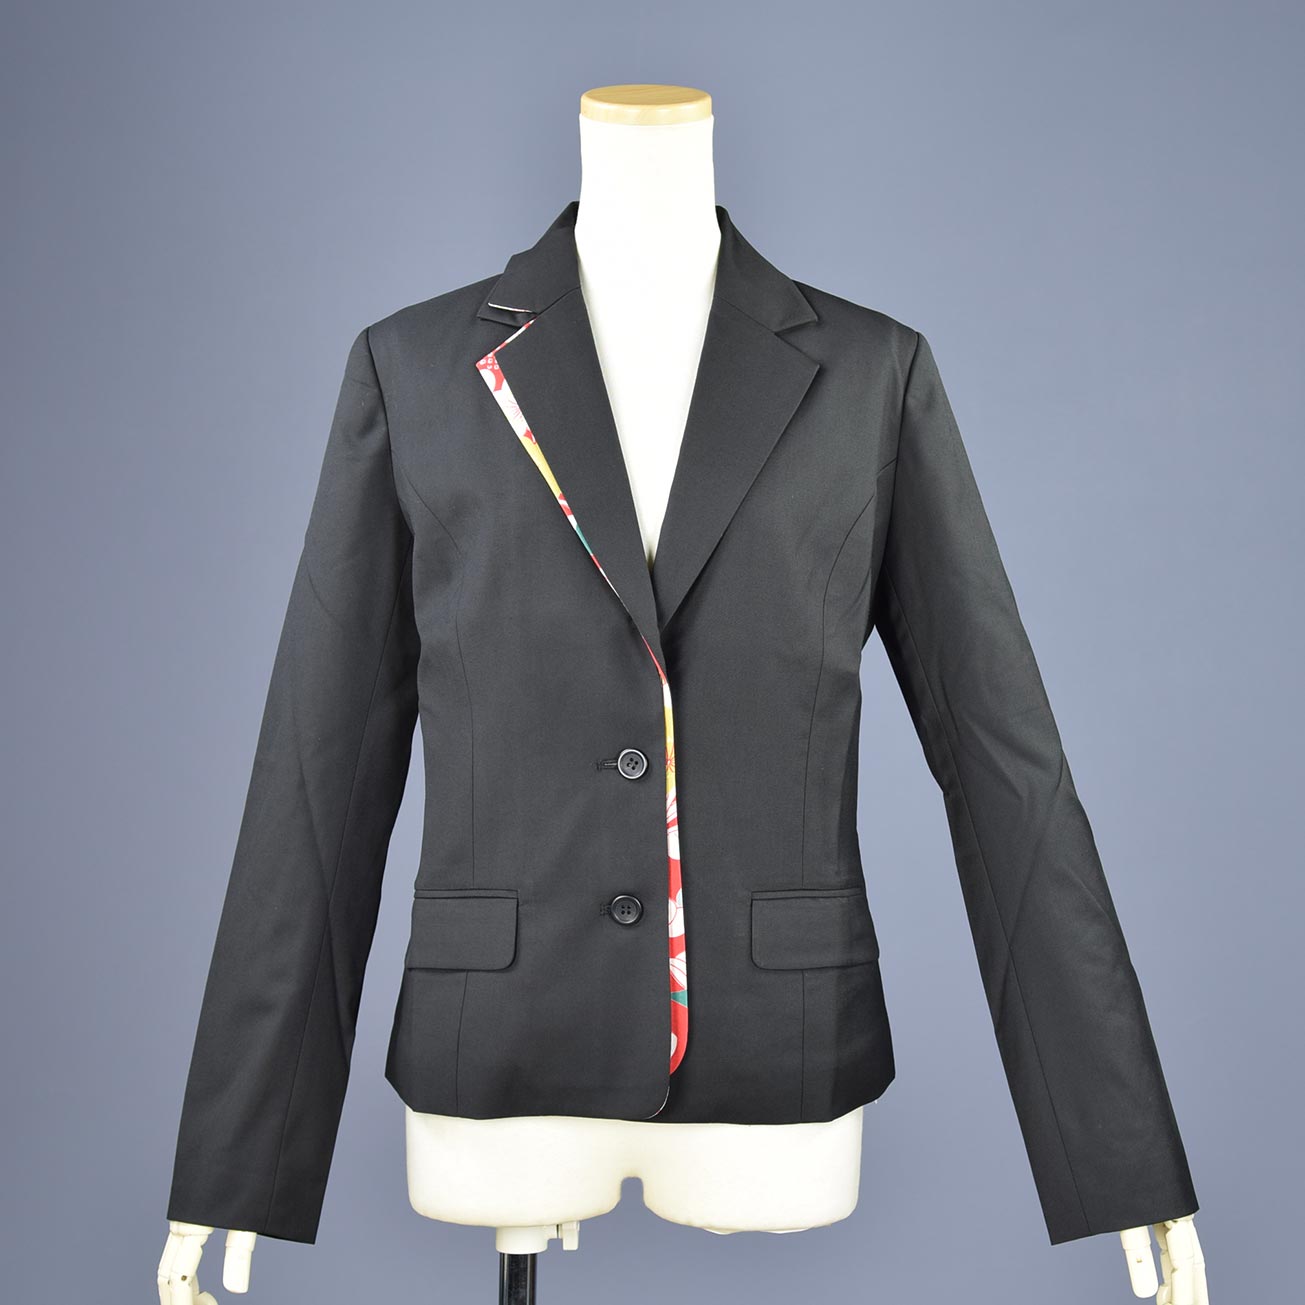 GOUK right collar double tailored jacket